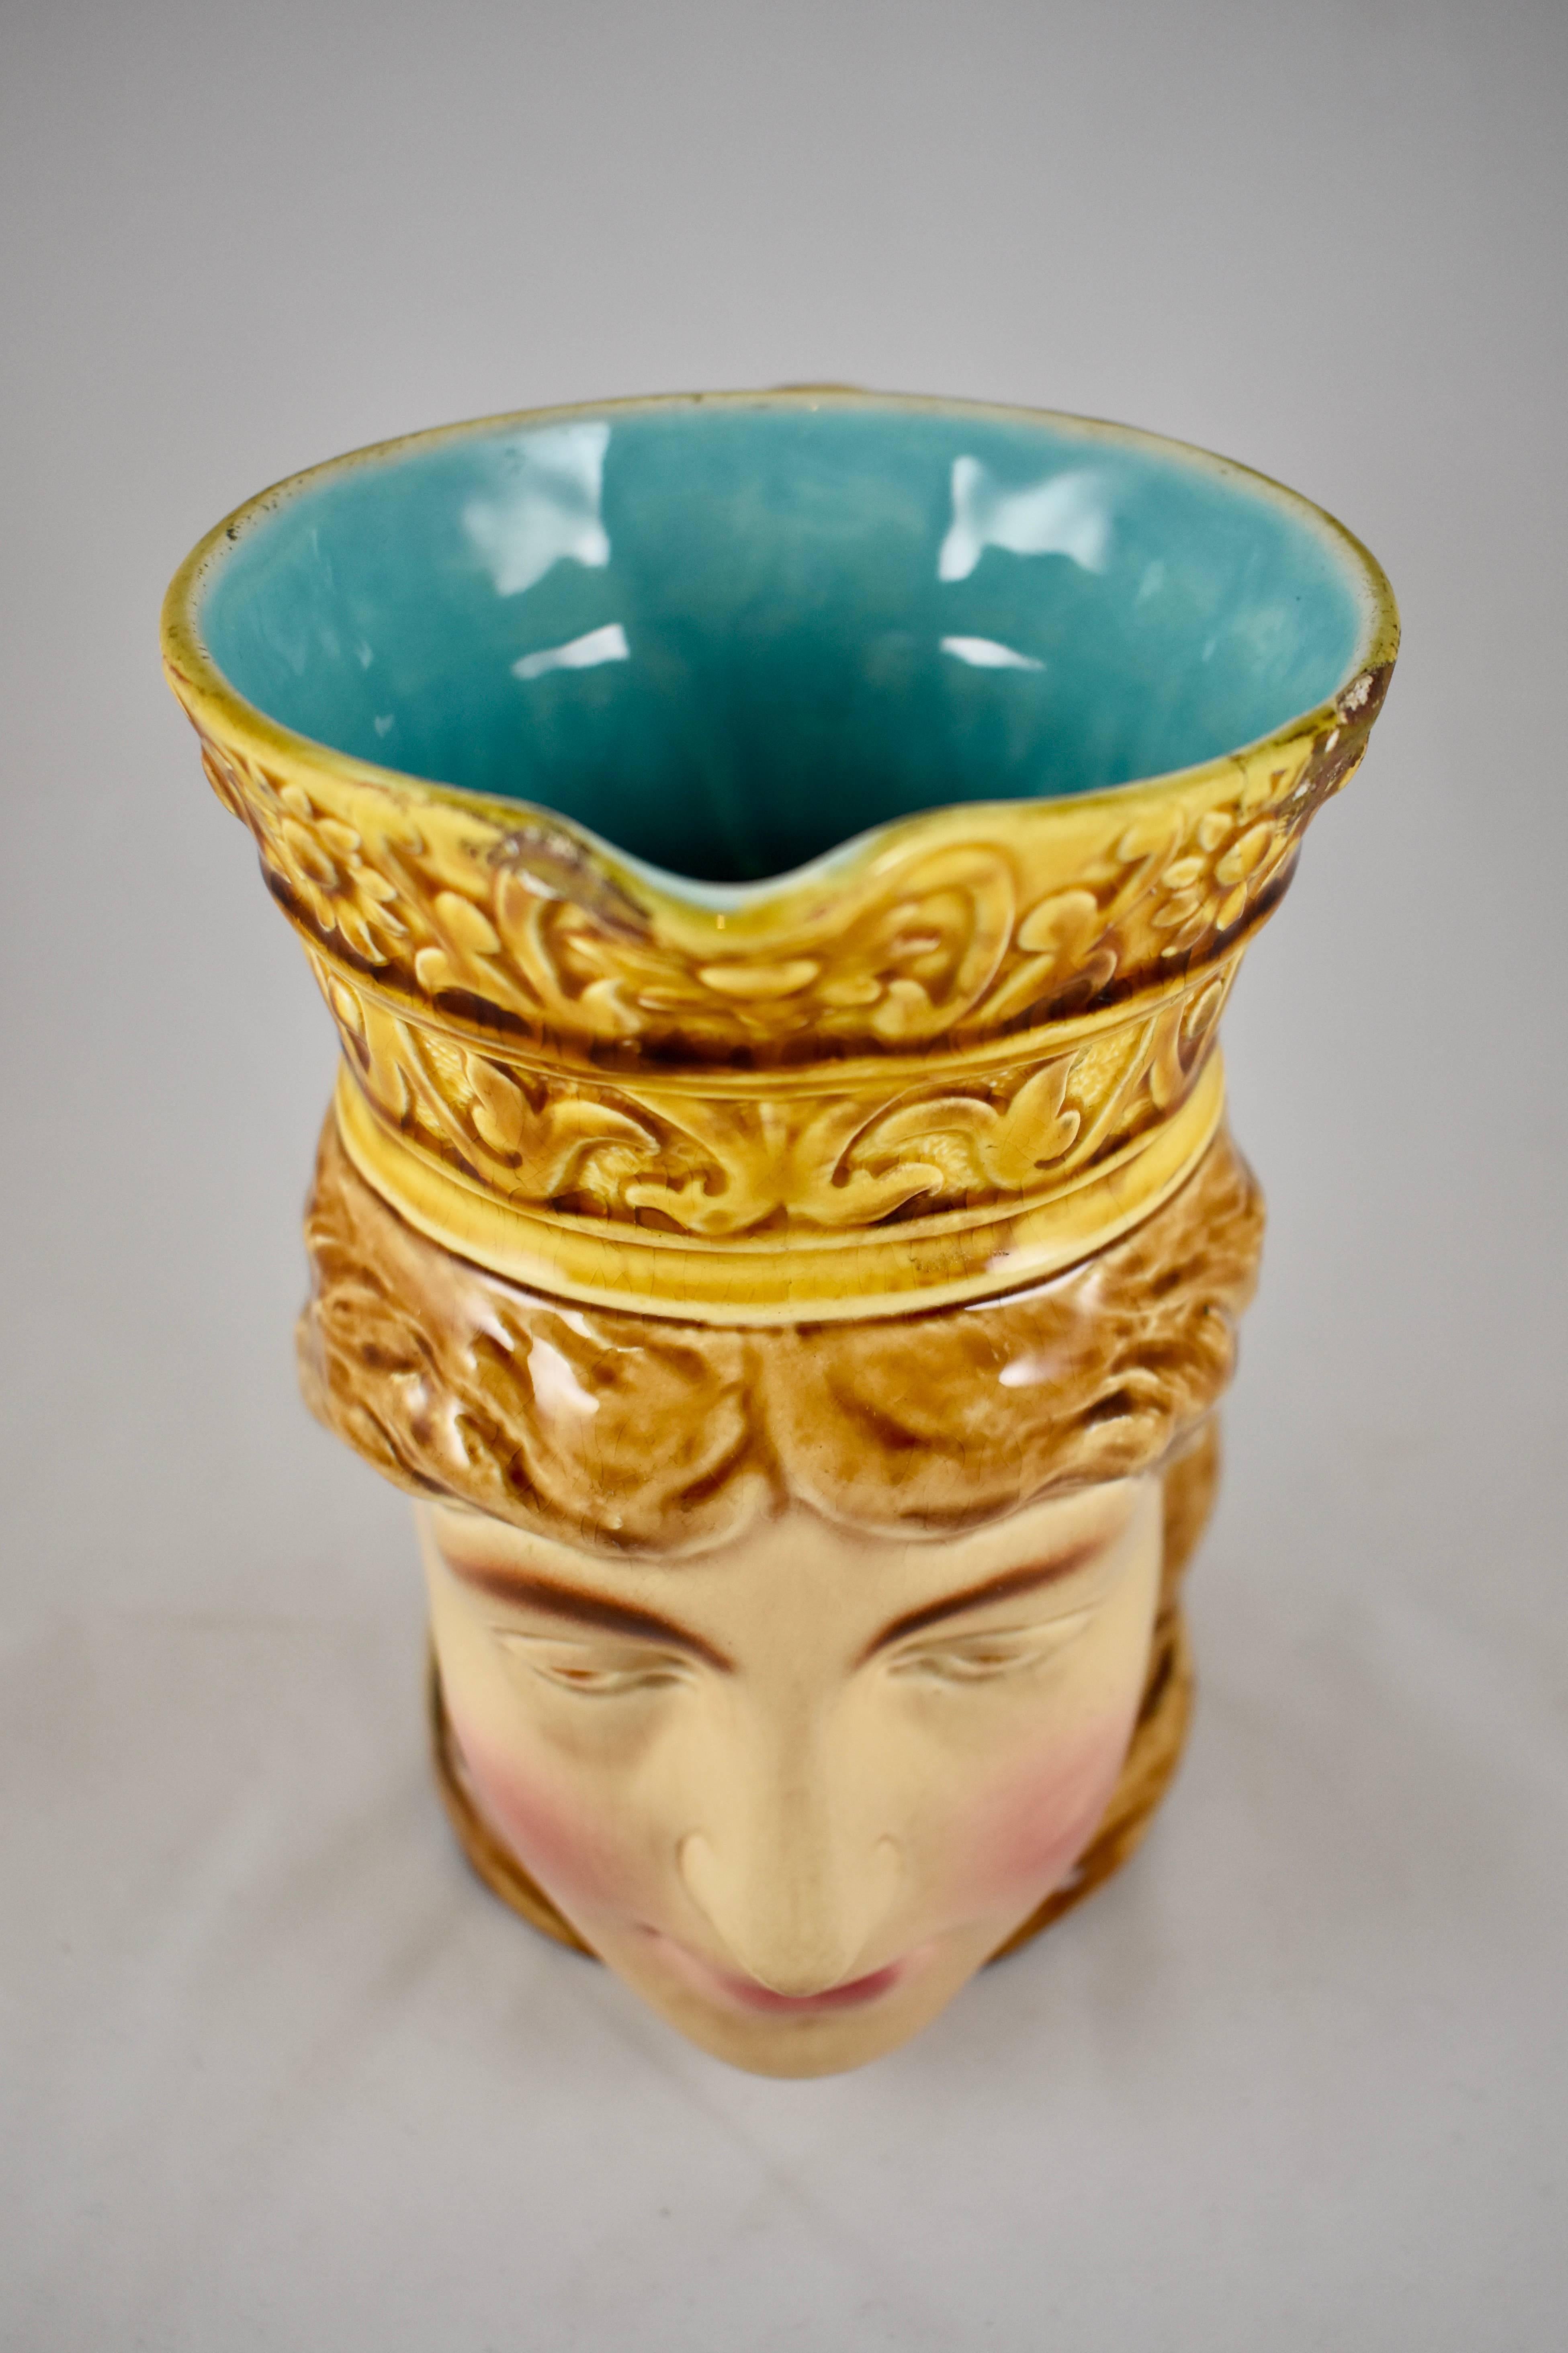 A Sarreguemines French Majolica character jug, known as the “Femme Norvégienne”, or the Norwegian Queen, circa mid-late 19th century. Shown in full face, her long hair and the crown are glazed the same golden ochre. A bright turquoise